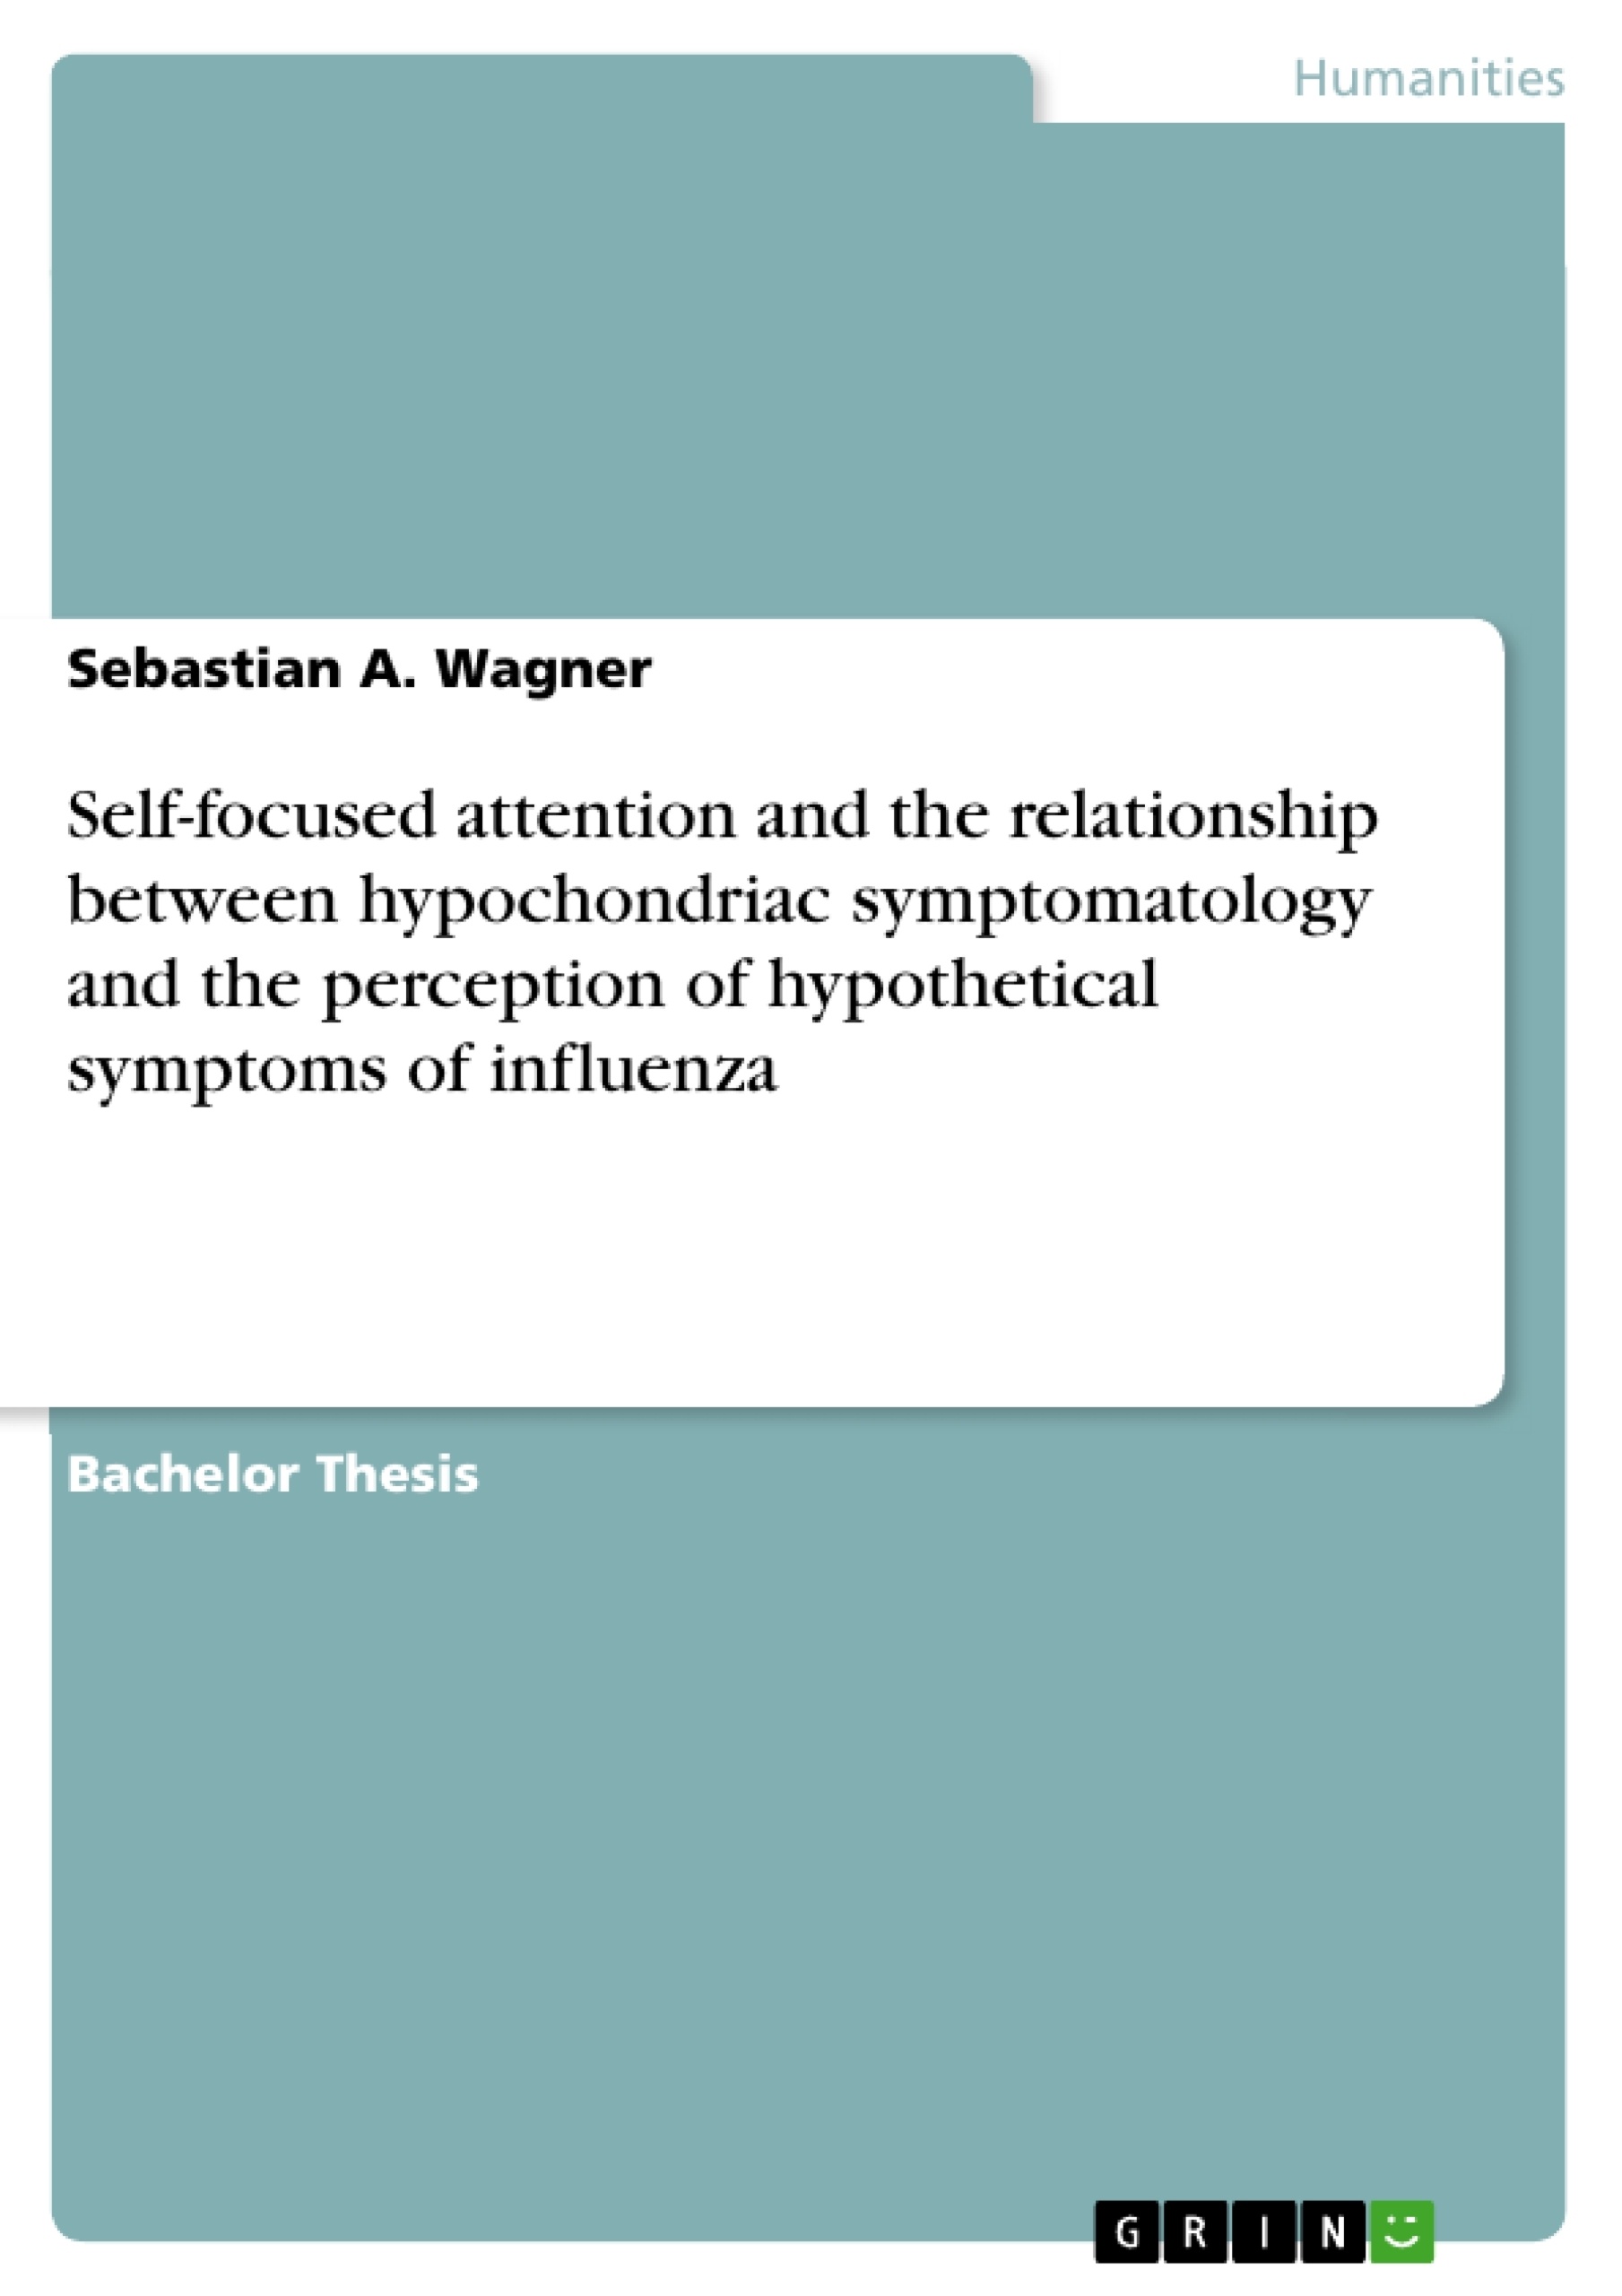 Titel: Self-focused attention and the relationship between hypochondriac symptomatology and the perception of hypothetical symptoms of influenza